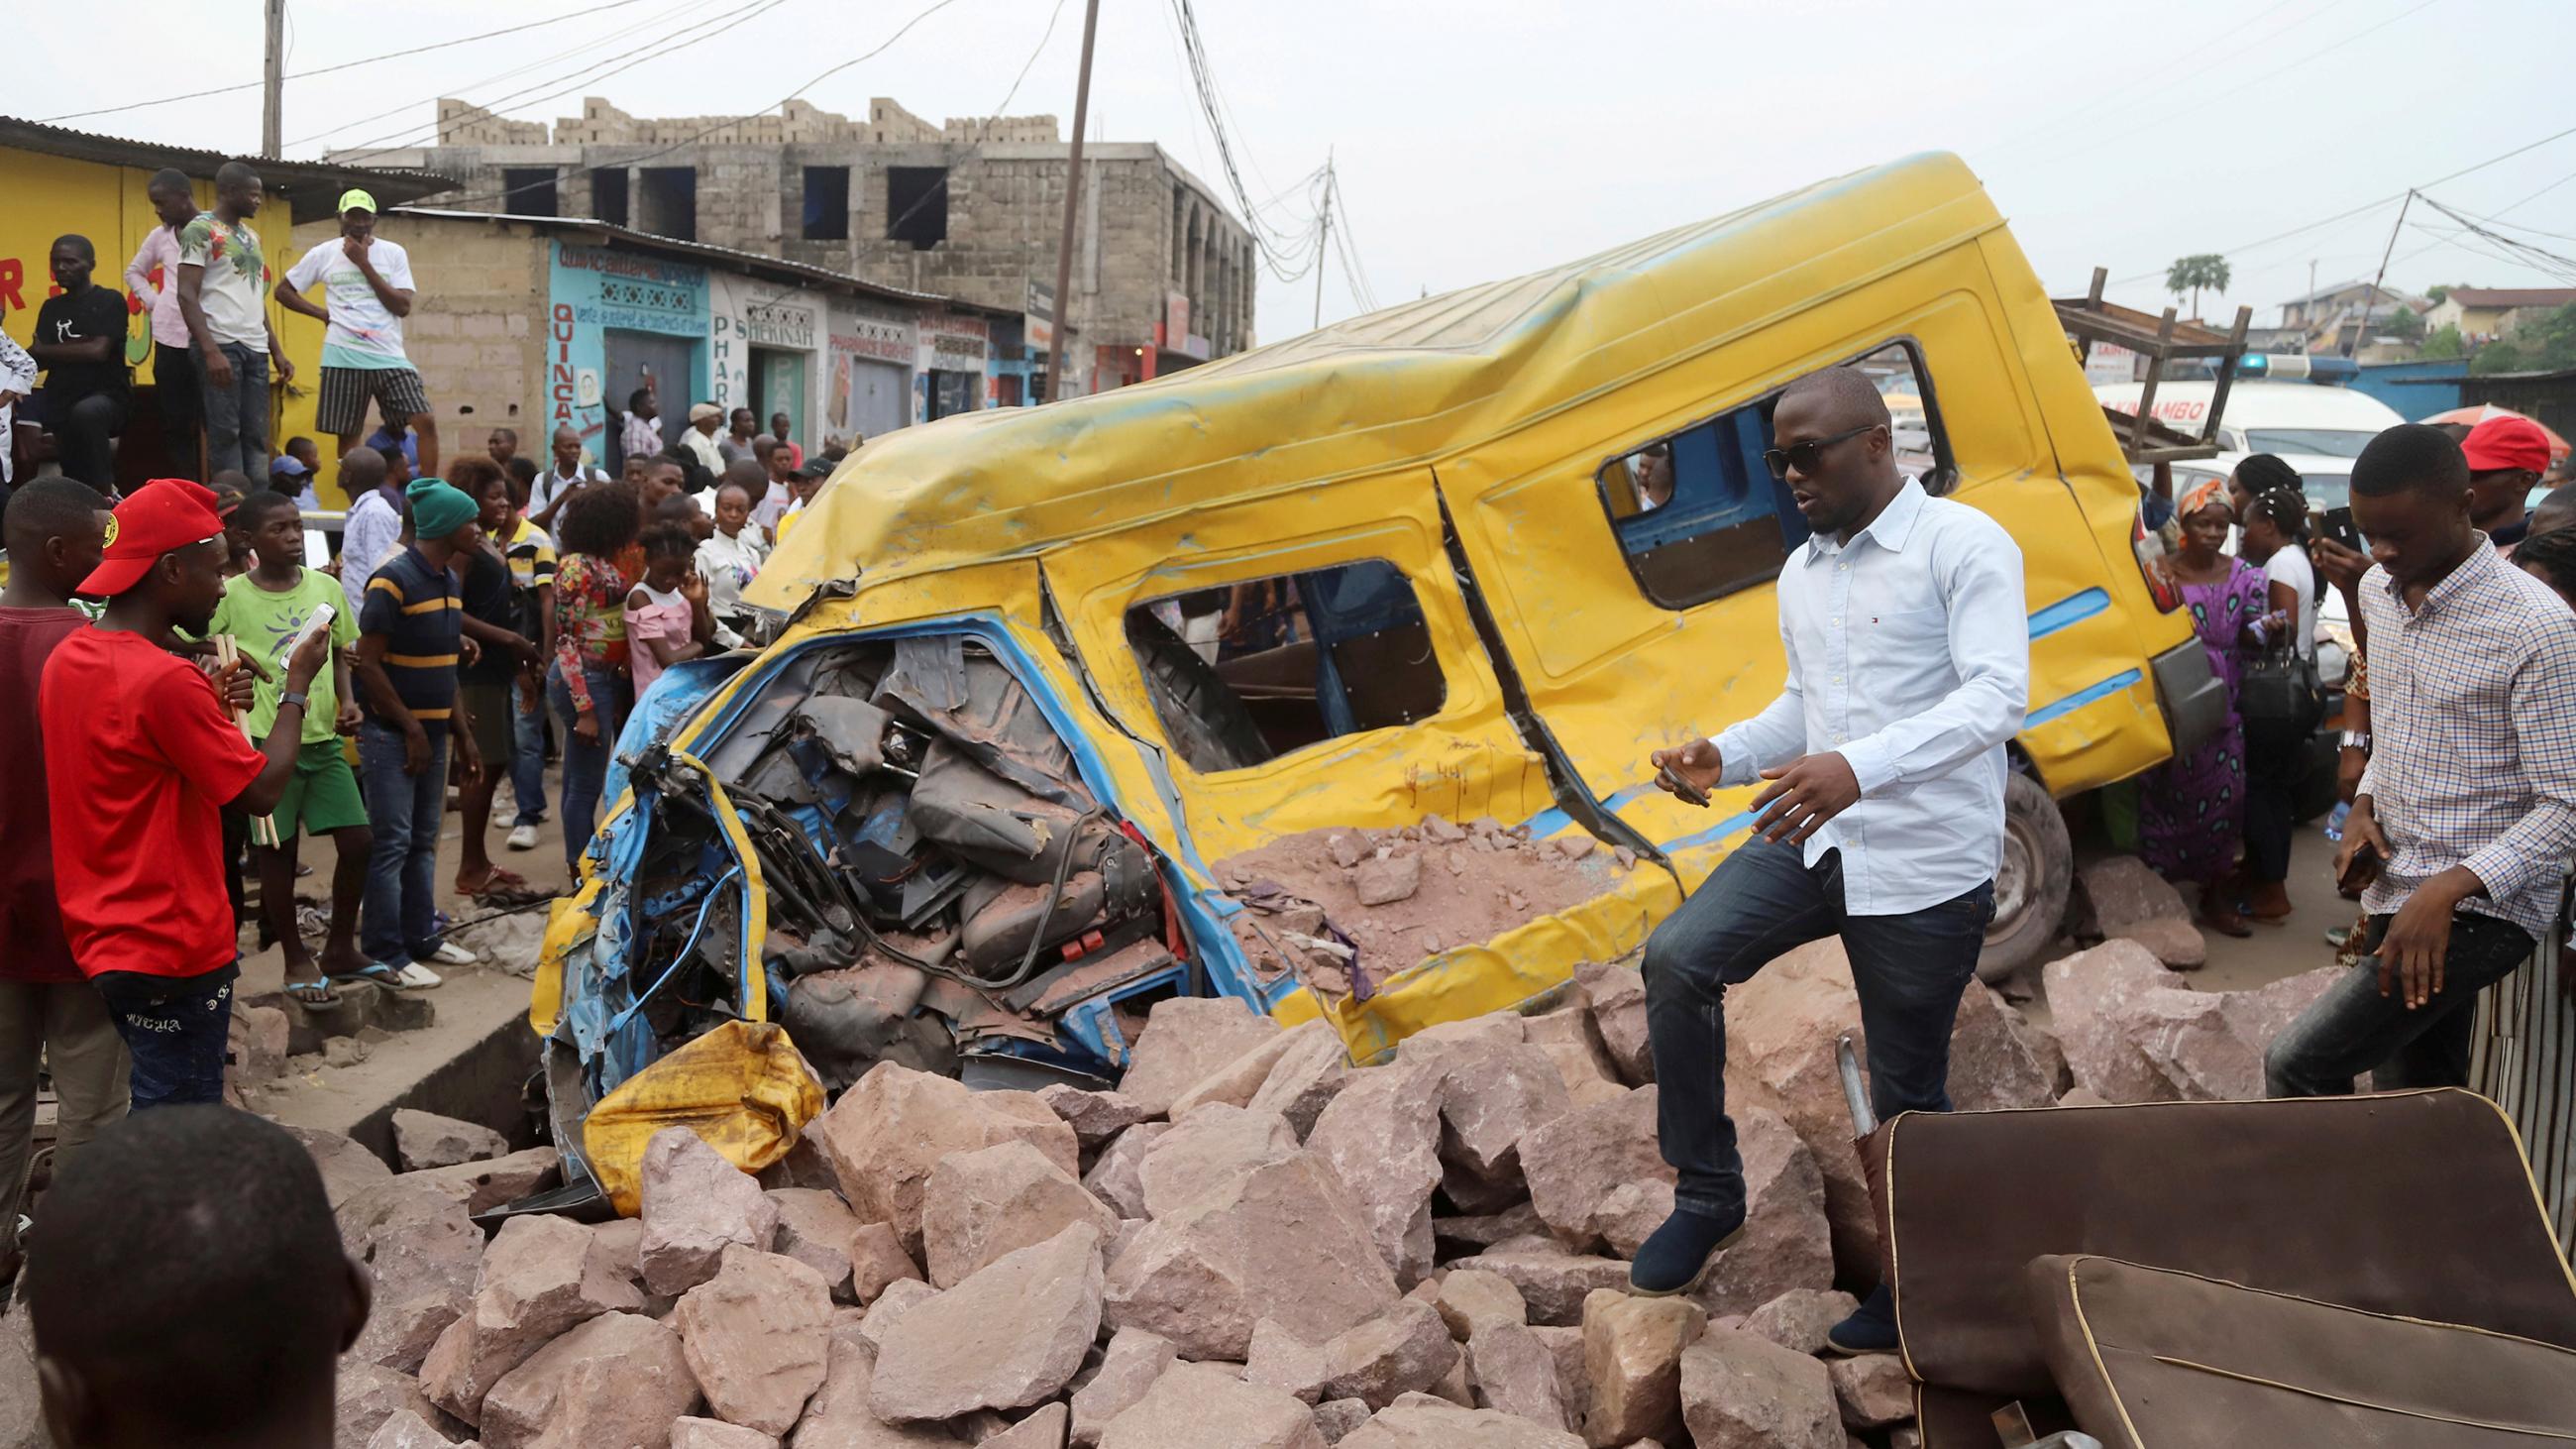 The image shows a yellow passenger bus wrecked in a pile of rubble.